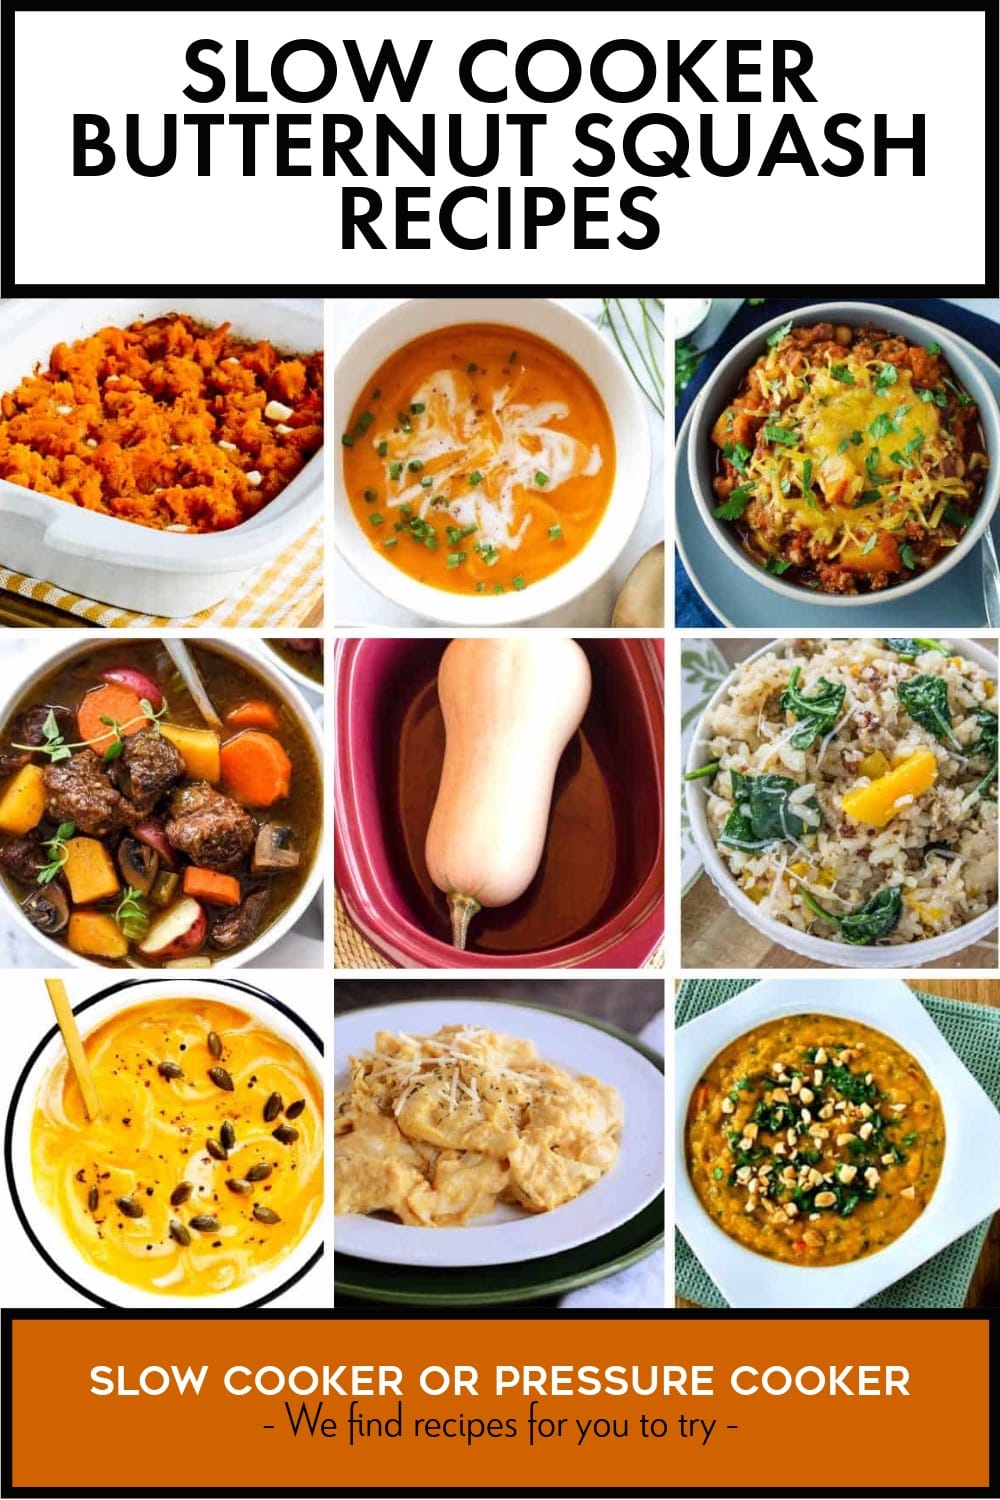 Pinterest image of Slow Cooker Butternut Squash Recipes